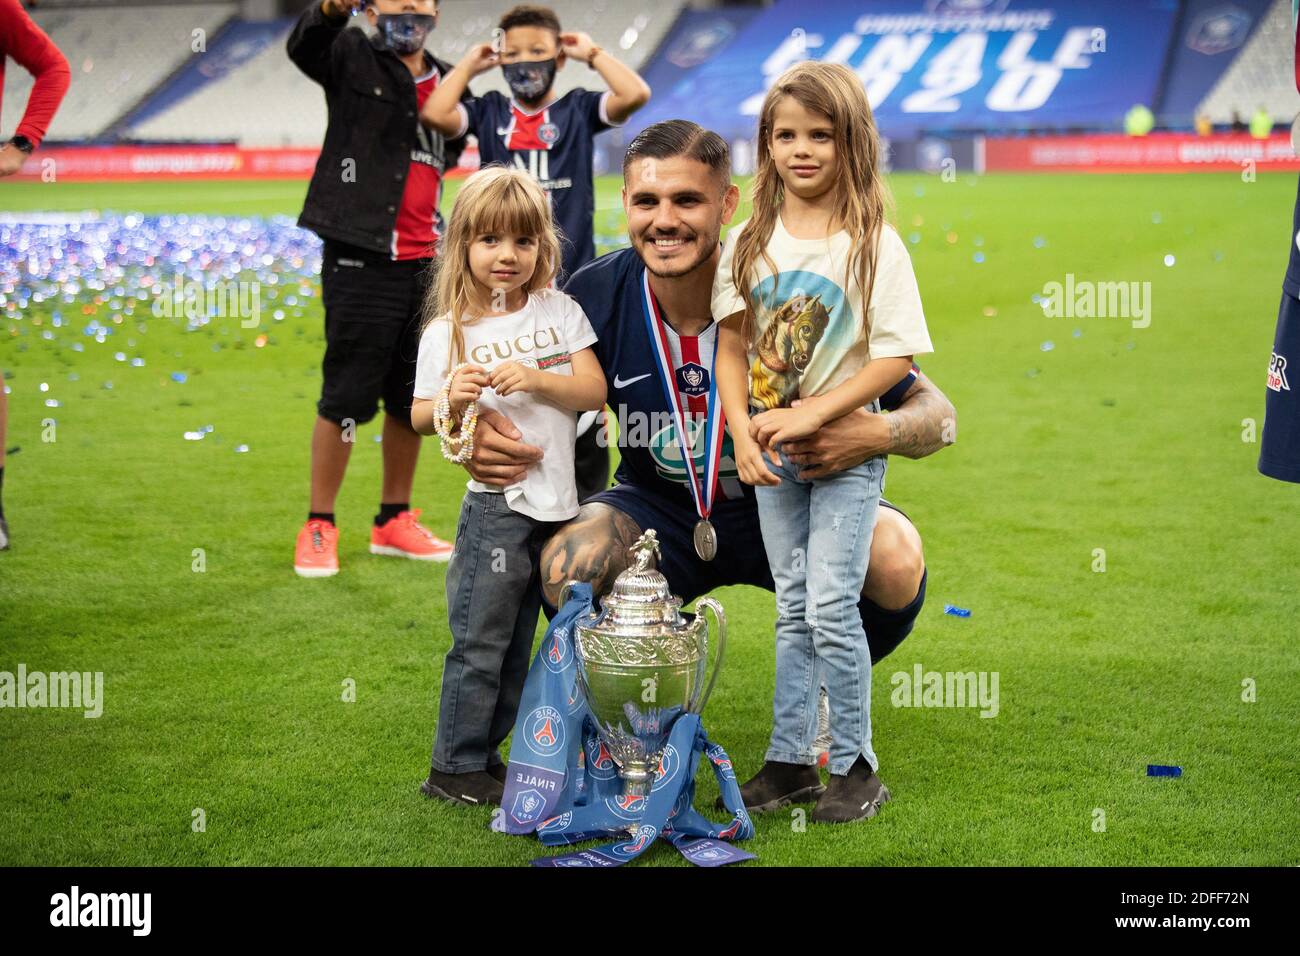 Paris Saint Germain's Mauro Icardi and daughters Isabella and Francesca celebrate with the trophy after winning the French Cup during the Final between AS Saint-Etienne and Paris Saint Germain at Stade de France on July 24, 2020 in Saint-Denis, France. PSG defeated Saint Etienne 1-0 and was crowned French Cup winners. Photo by David Niviere/ABACAPRESS.COM Stock Photo